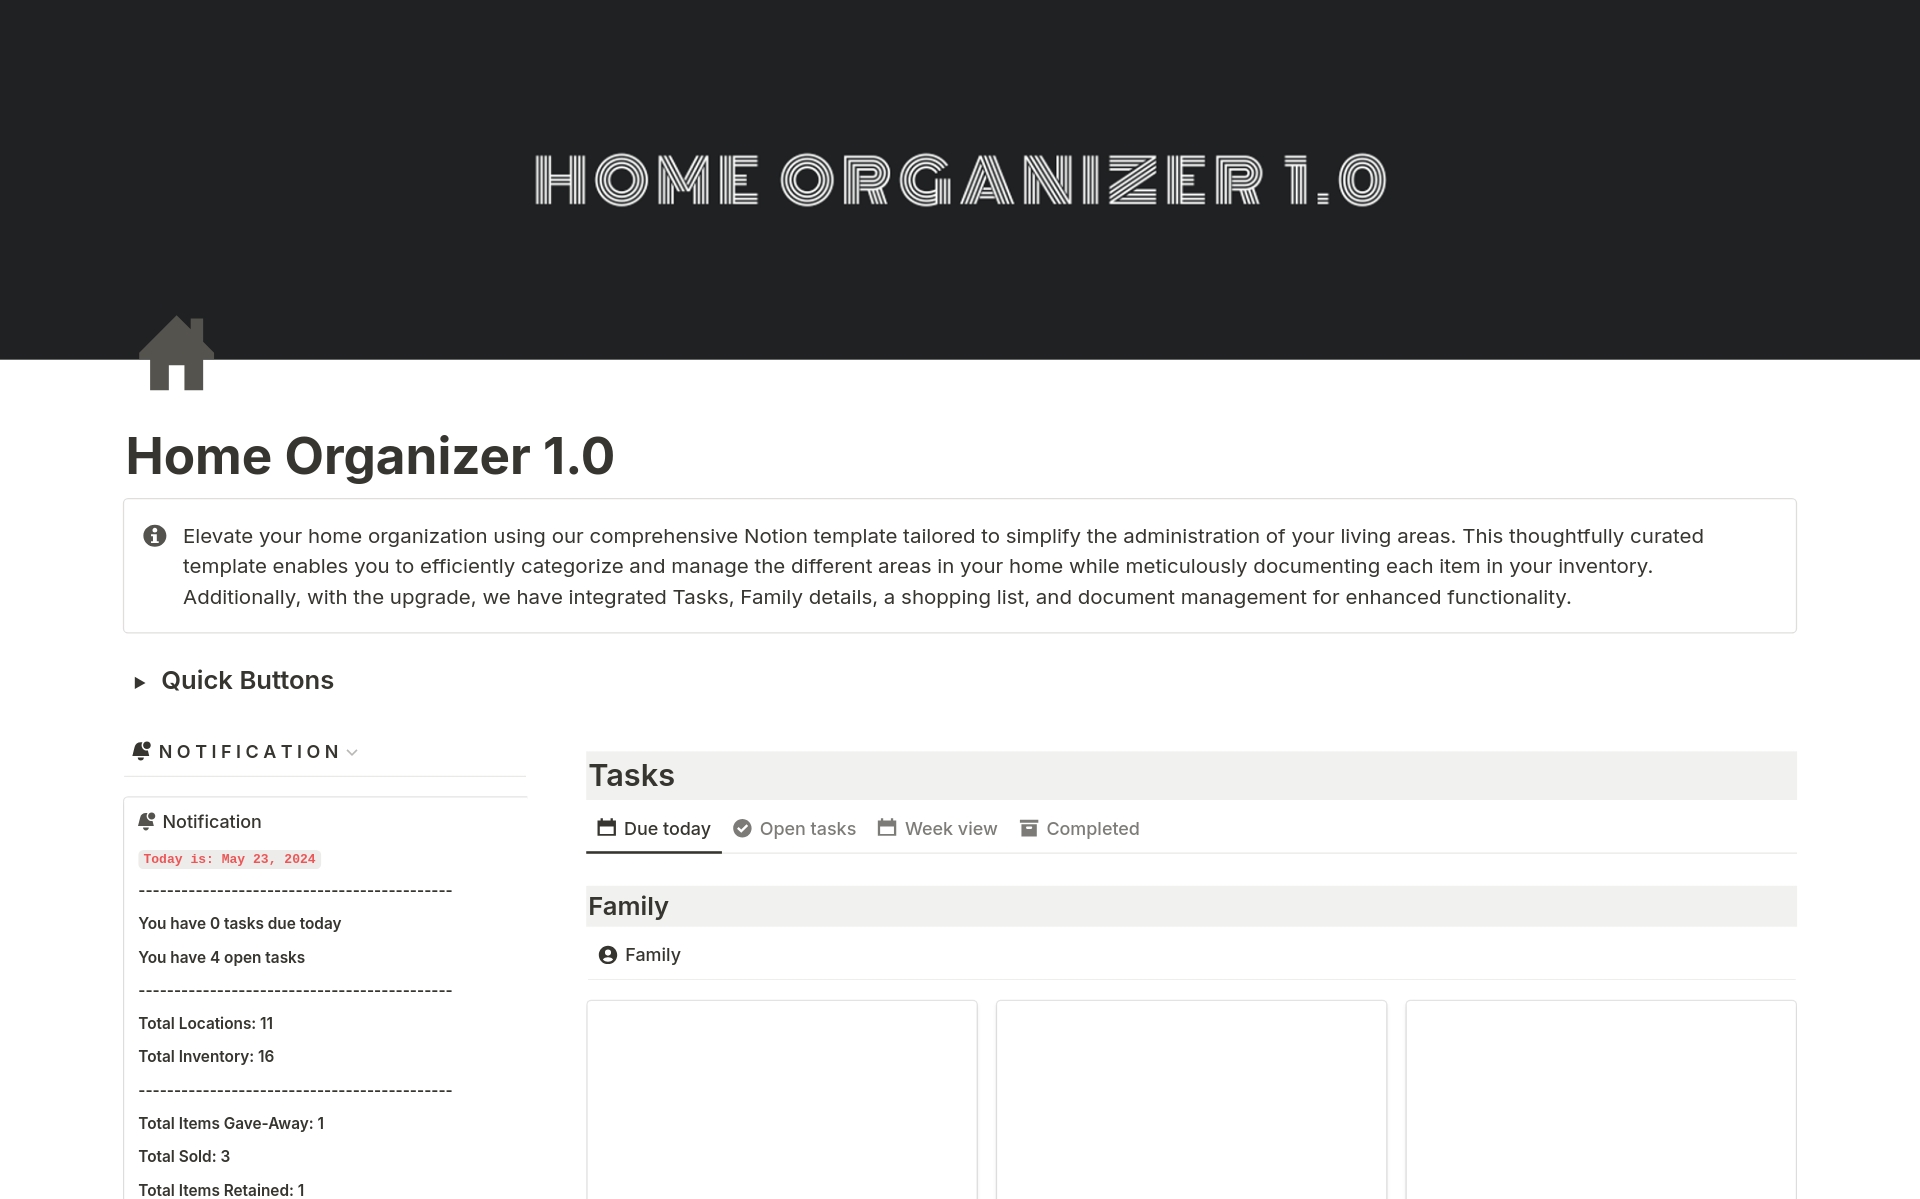 Elevate your home organization using our comprehensive Notion template tailored to simplify the administration of your living areas. 